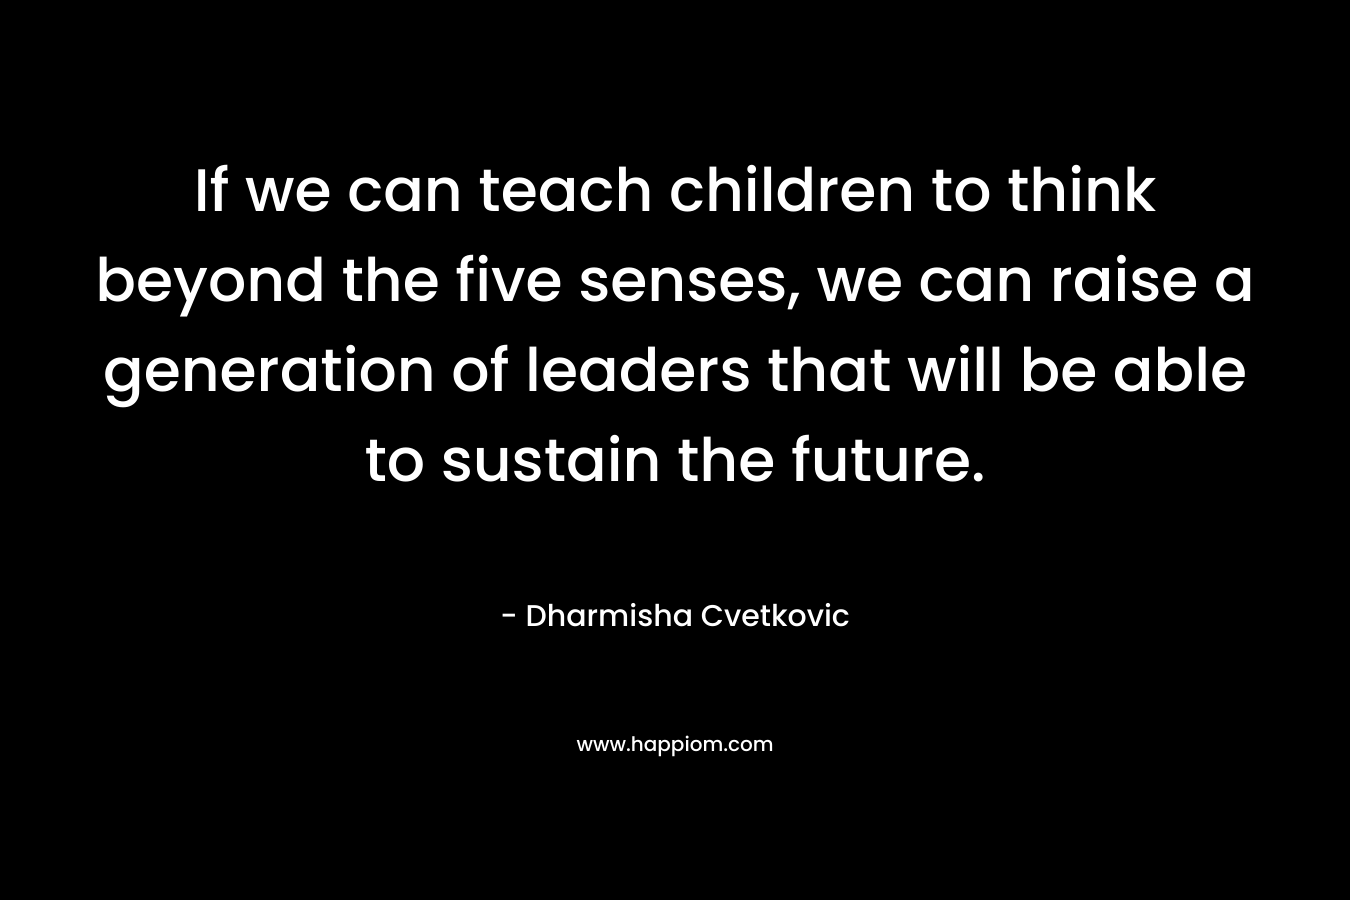 If we can teach children to think beyond the five senses, we can raise a generation of leaders that will be able to sustain the future. – Dharmisha Cvetkovic